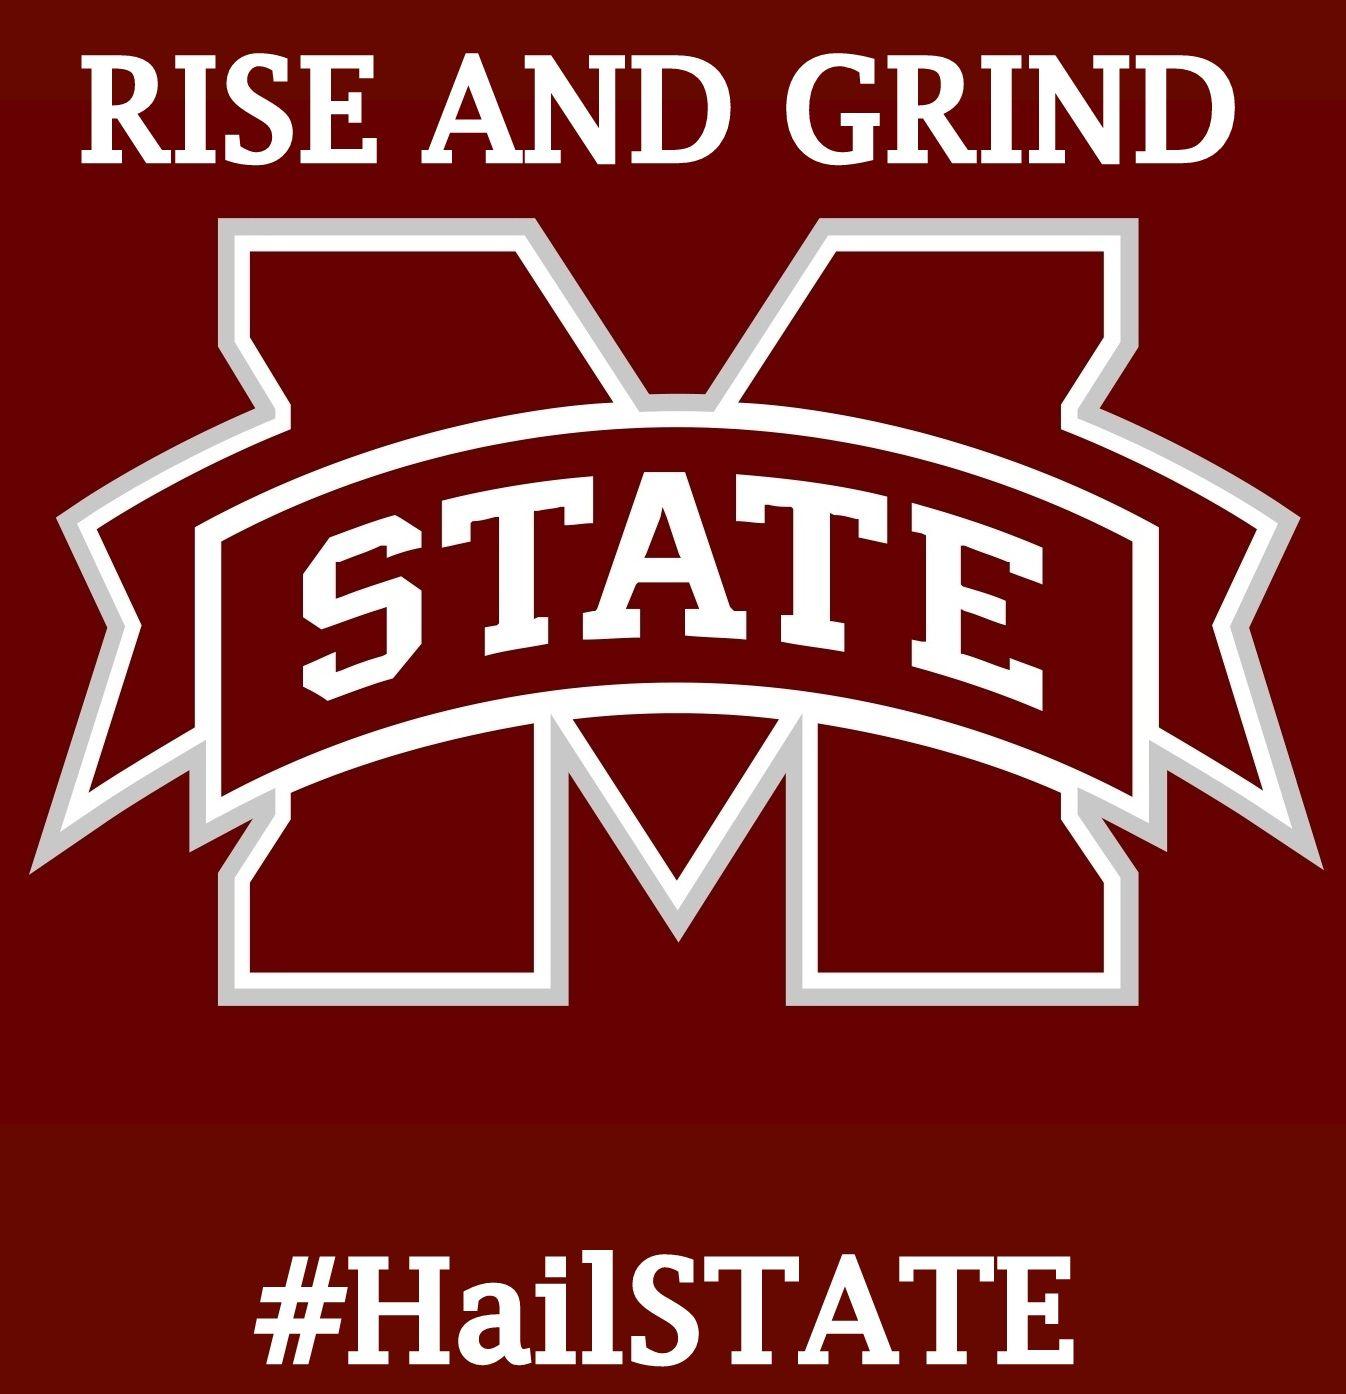 Rise and GRIND! #hailstate. My Dawgs!. Mississippi state